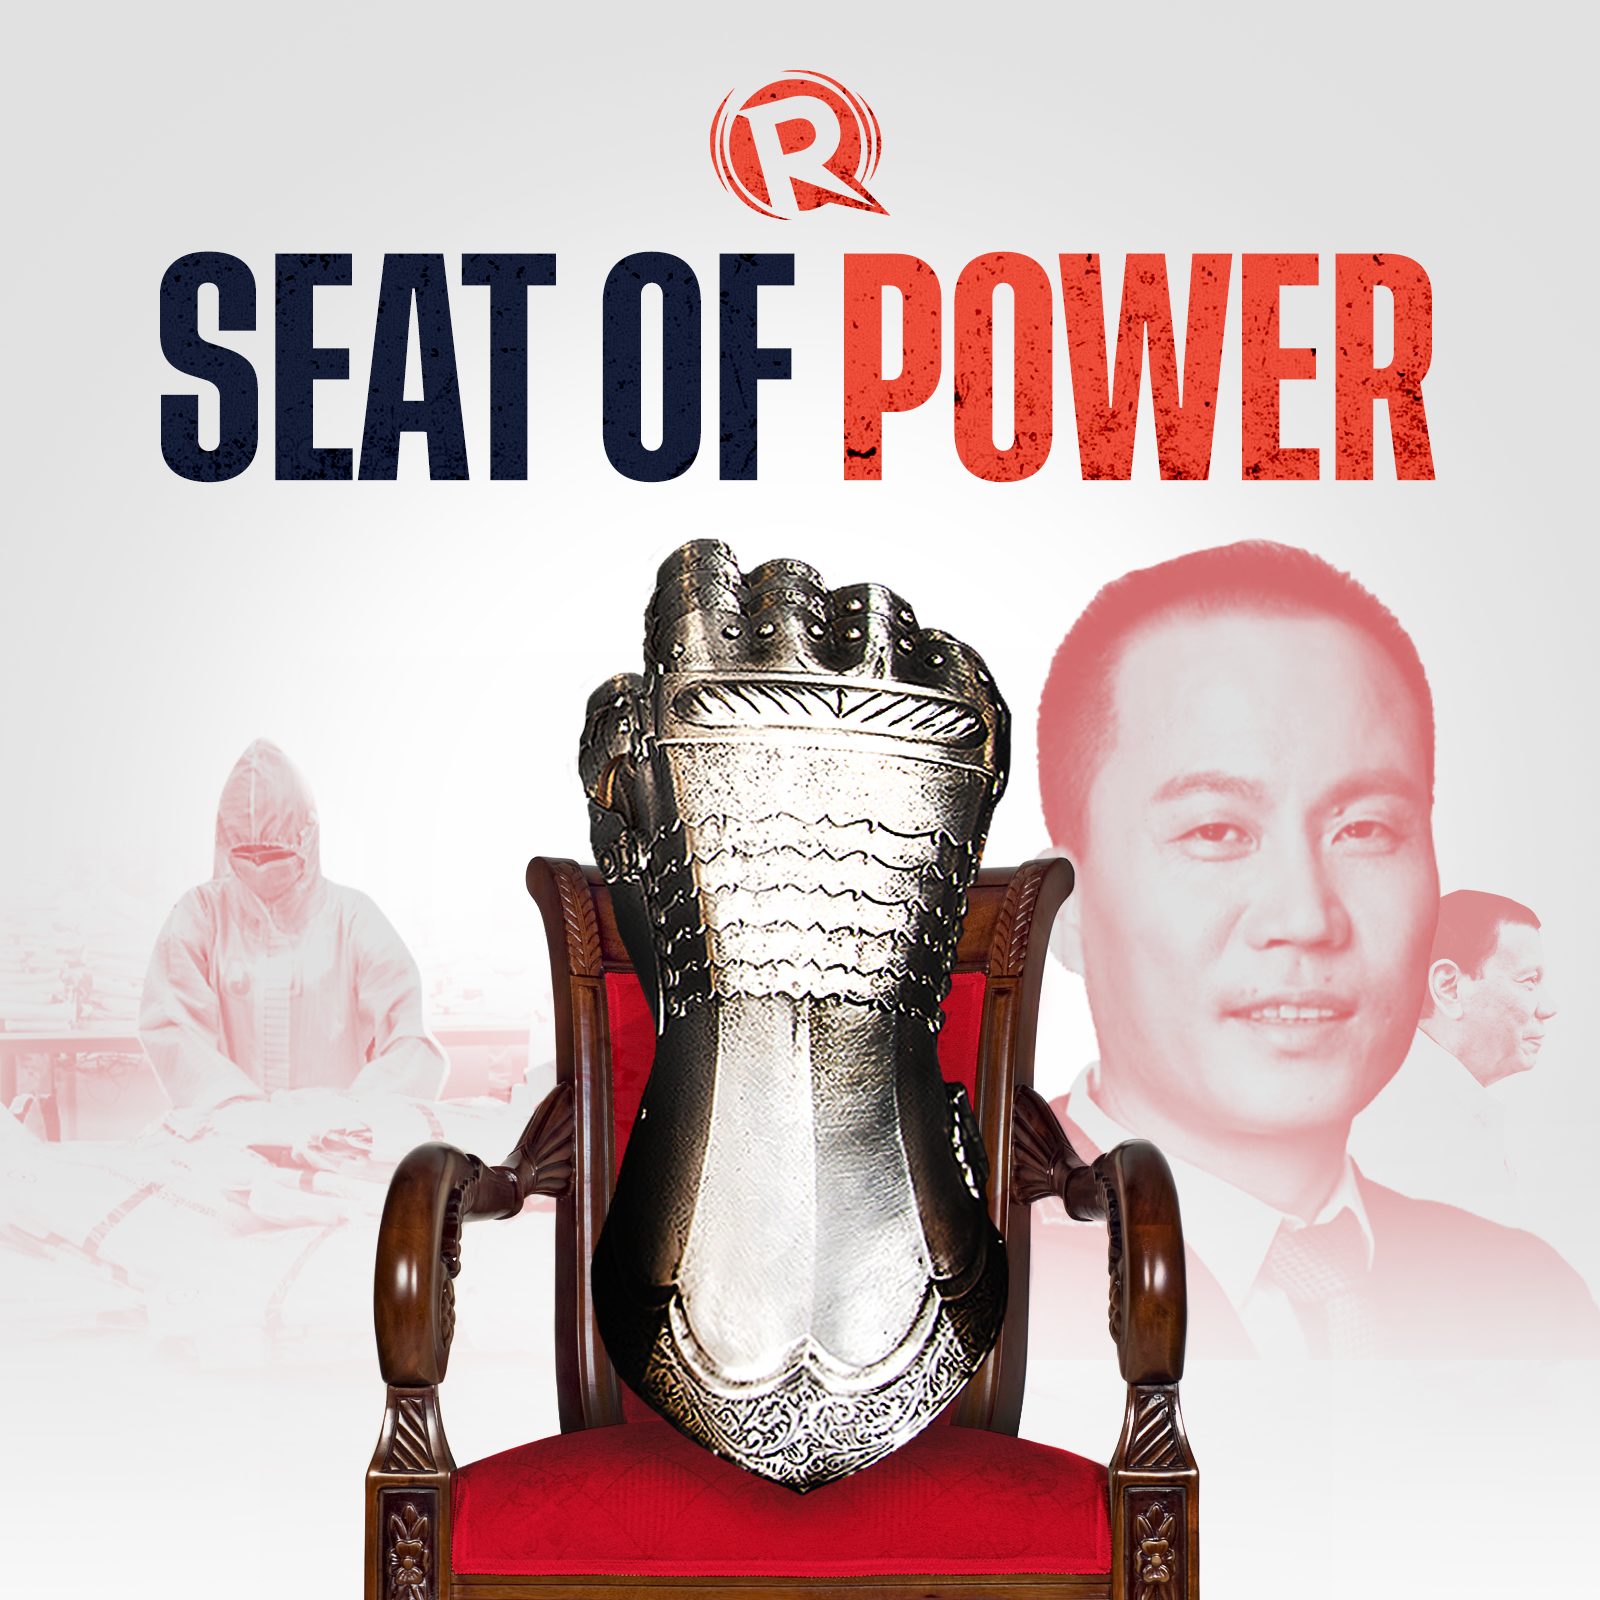 [PODCAST] Seat of Power: Who is Michael Yang?